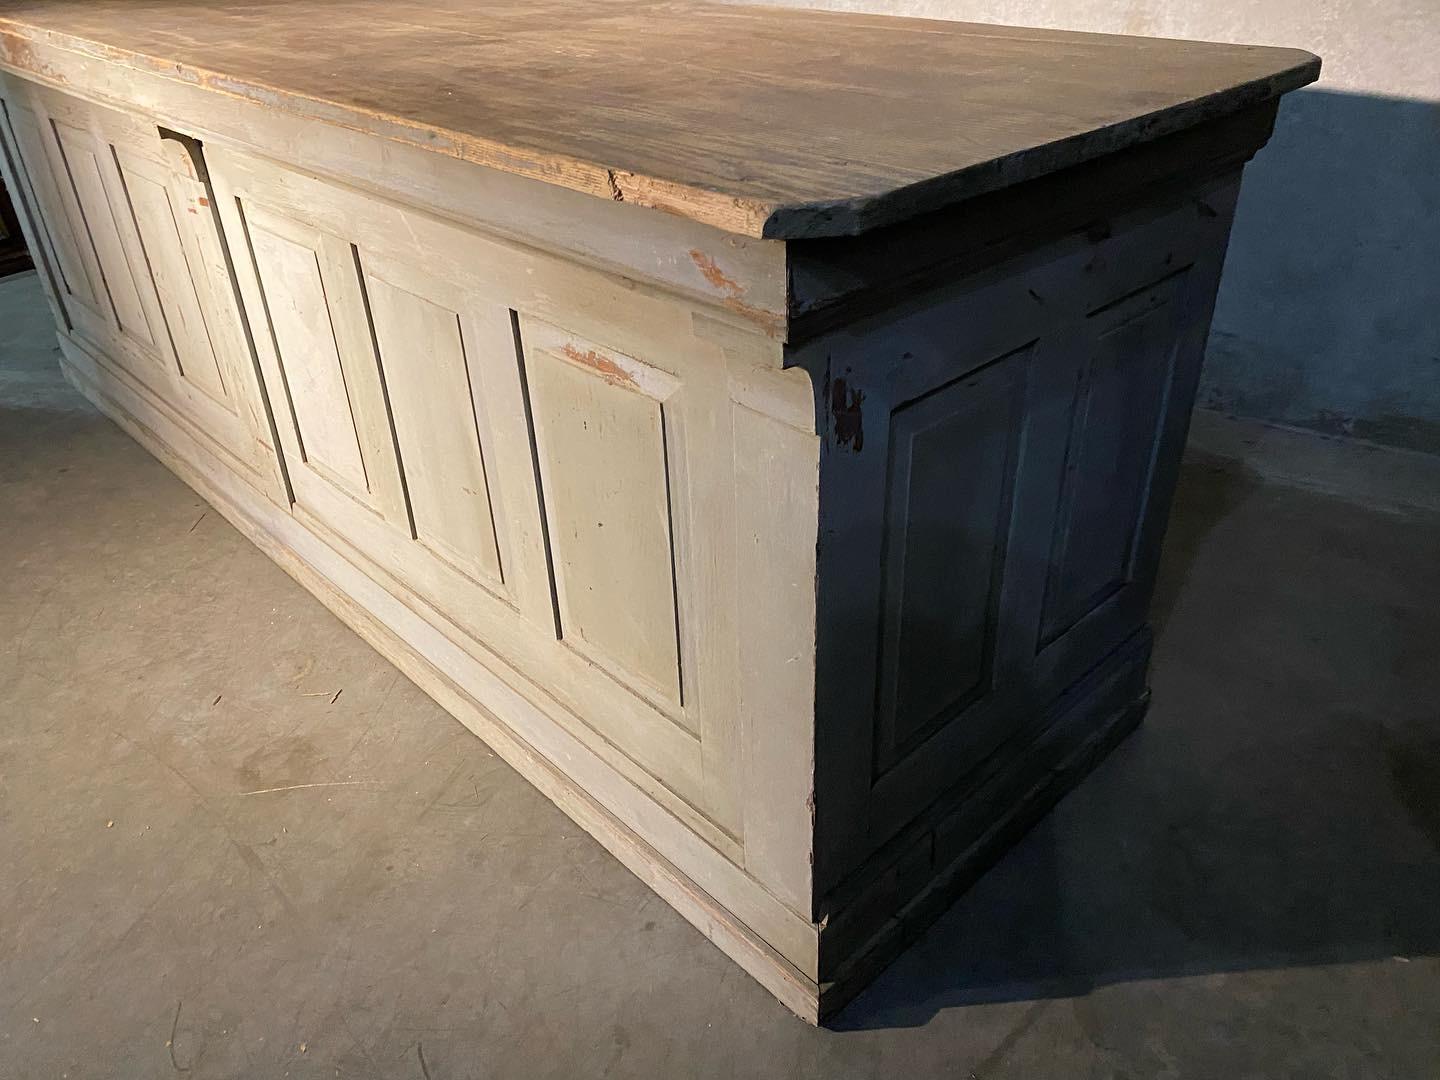 A very good authentic example of a multi panel counter with soft age cracked grey paint, open back, scrubbed oak top in very simple distinct features.. It is not easy to find an original counter that has not been cut in two, painted 50 times, or